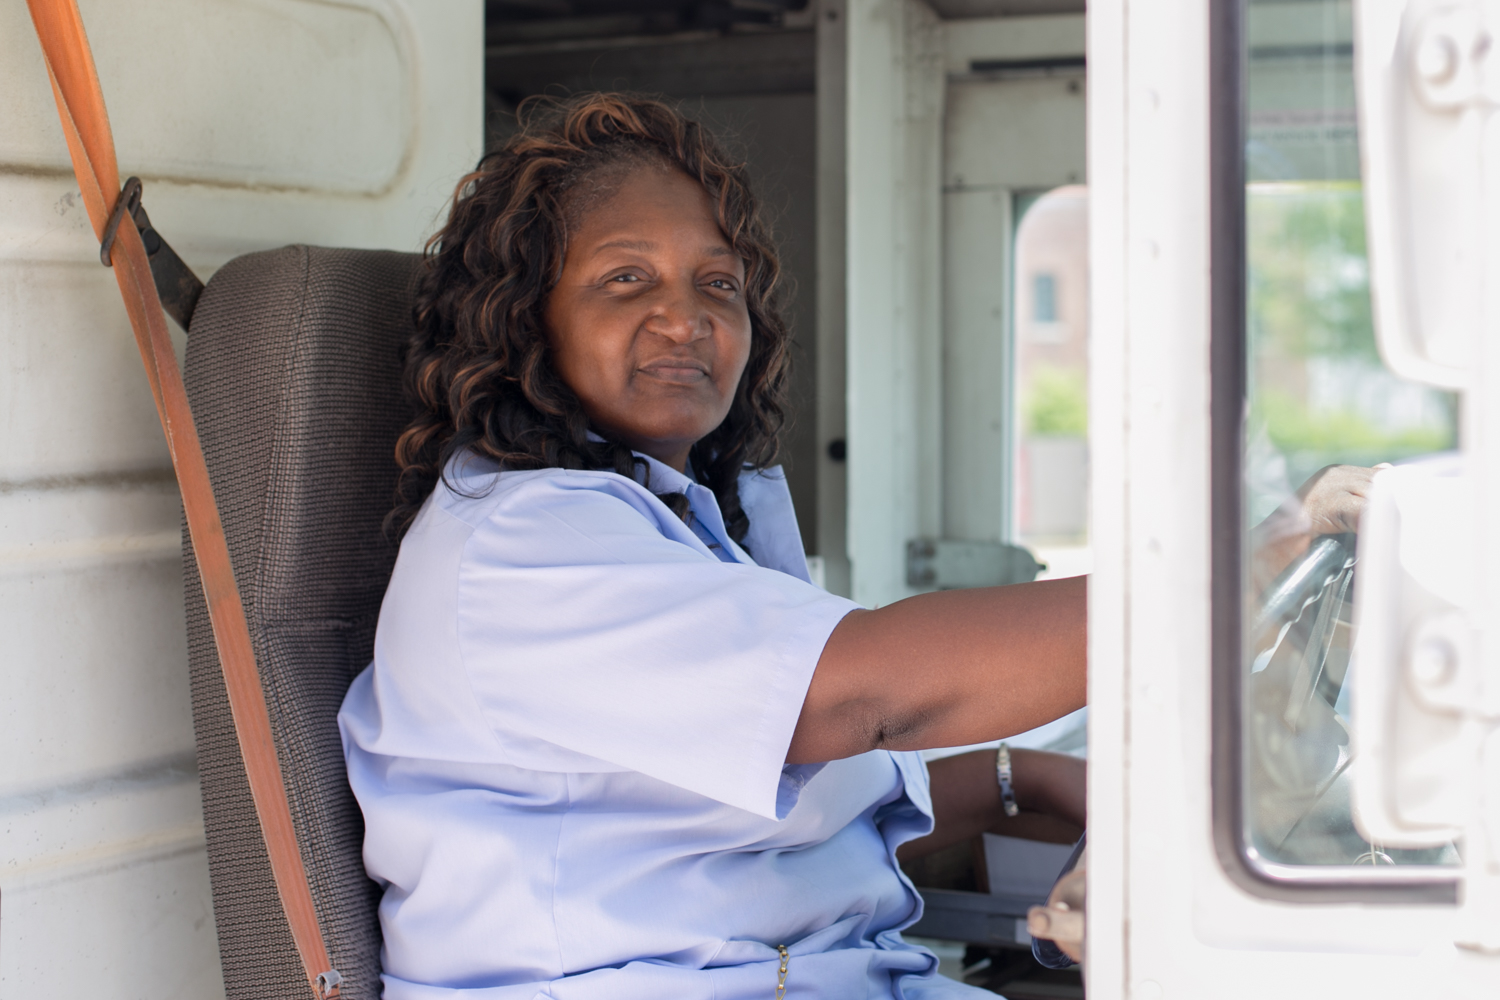   Sheryl has been delivering mail for USPS for over 11 years but doesn't love it.   